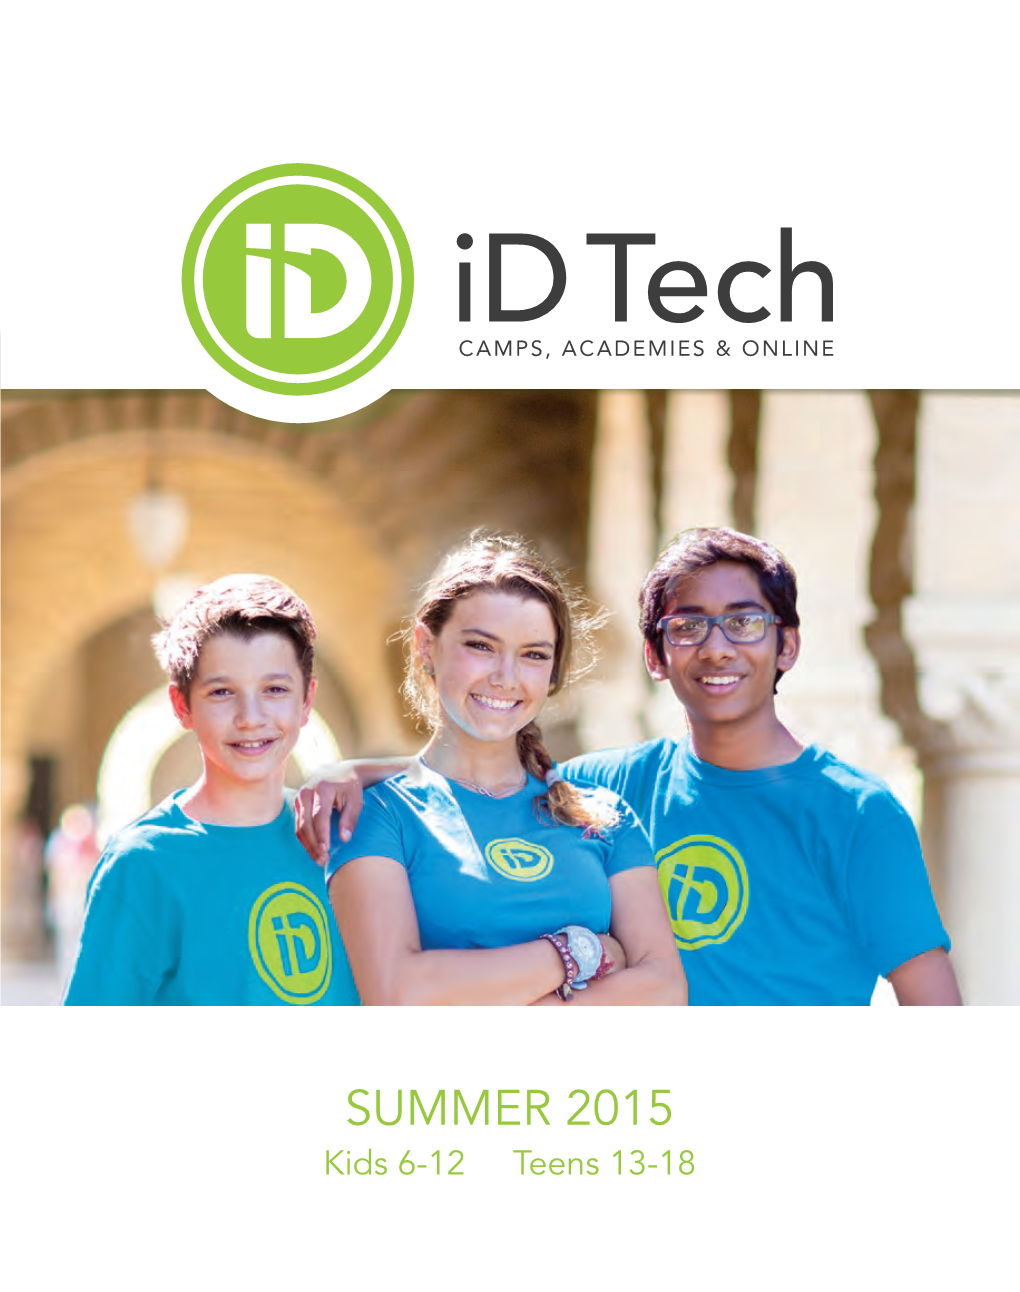 SUMMER 2015 Kids 6-12 Teens 13-18 Camps Academies Online at Id Tech, Our Family Company Is Fueled by Optimism